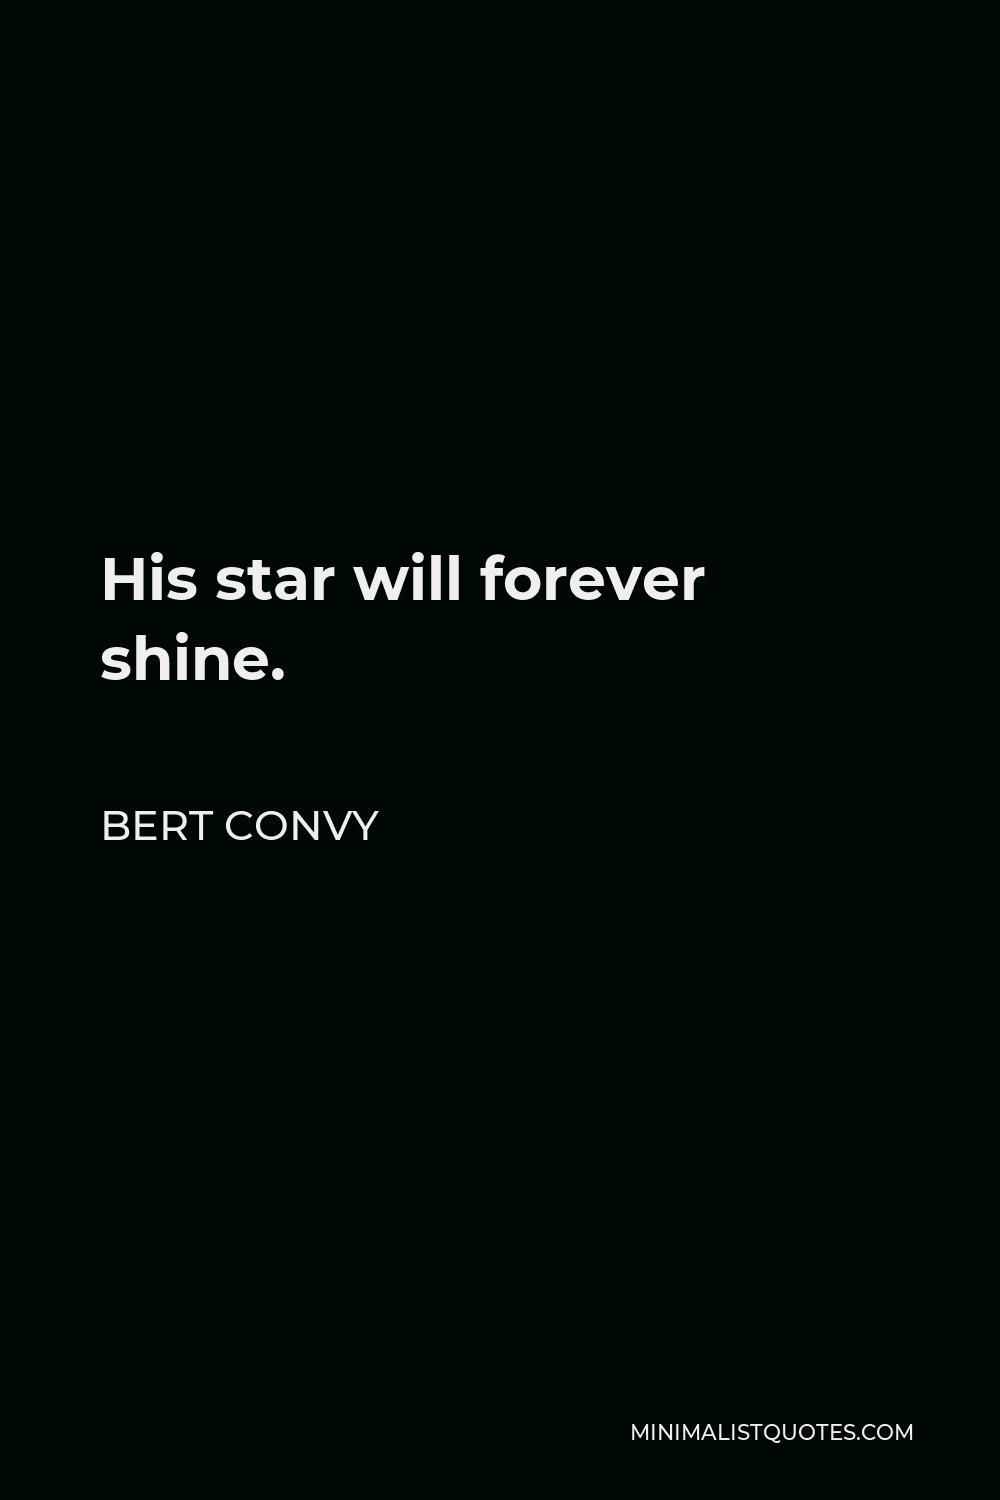 Bert Convy Quote - His star will forever shine.